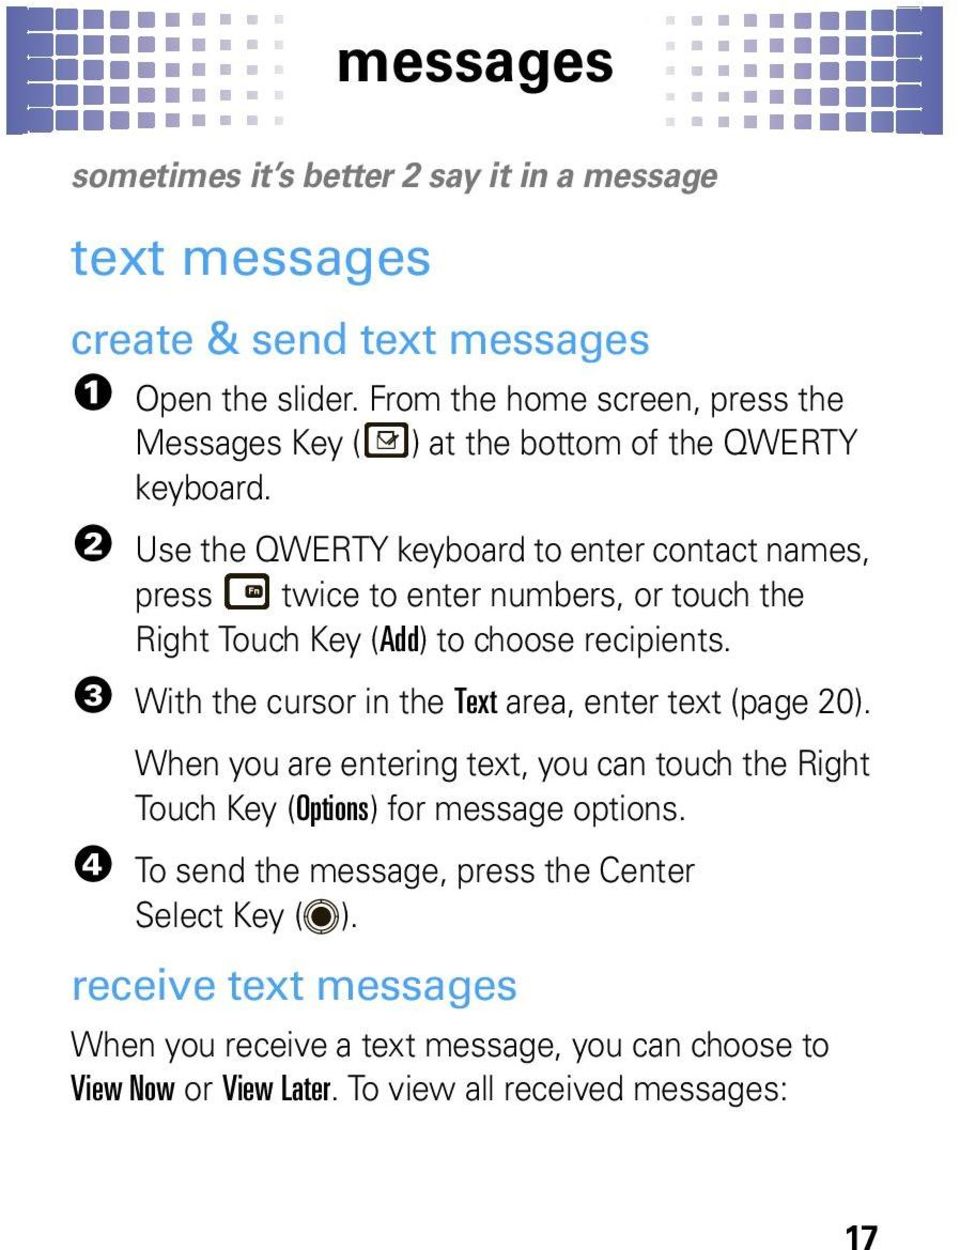 2 Use the QWERTY keyboard to enter contact names, press twice to enter numbers, or touch the Right Touch Key (Add) to choose recipients.